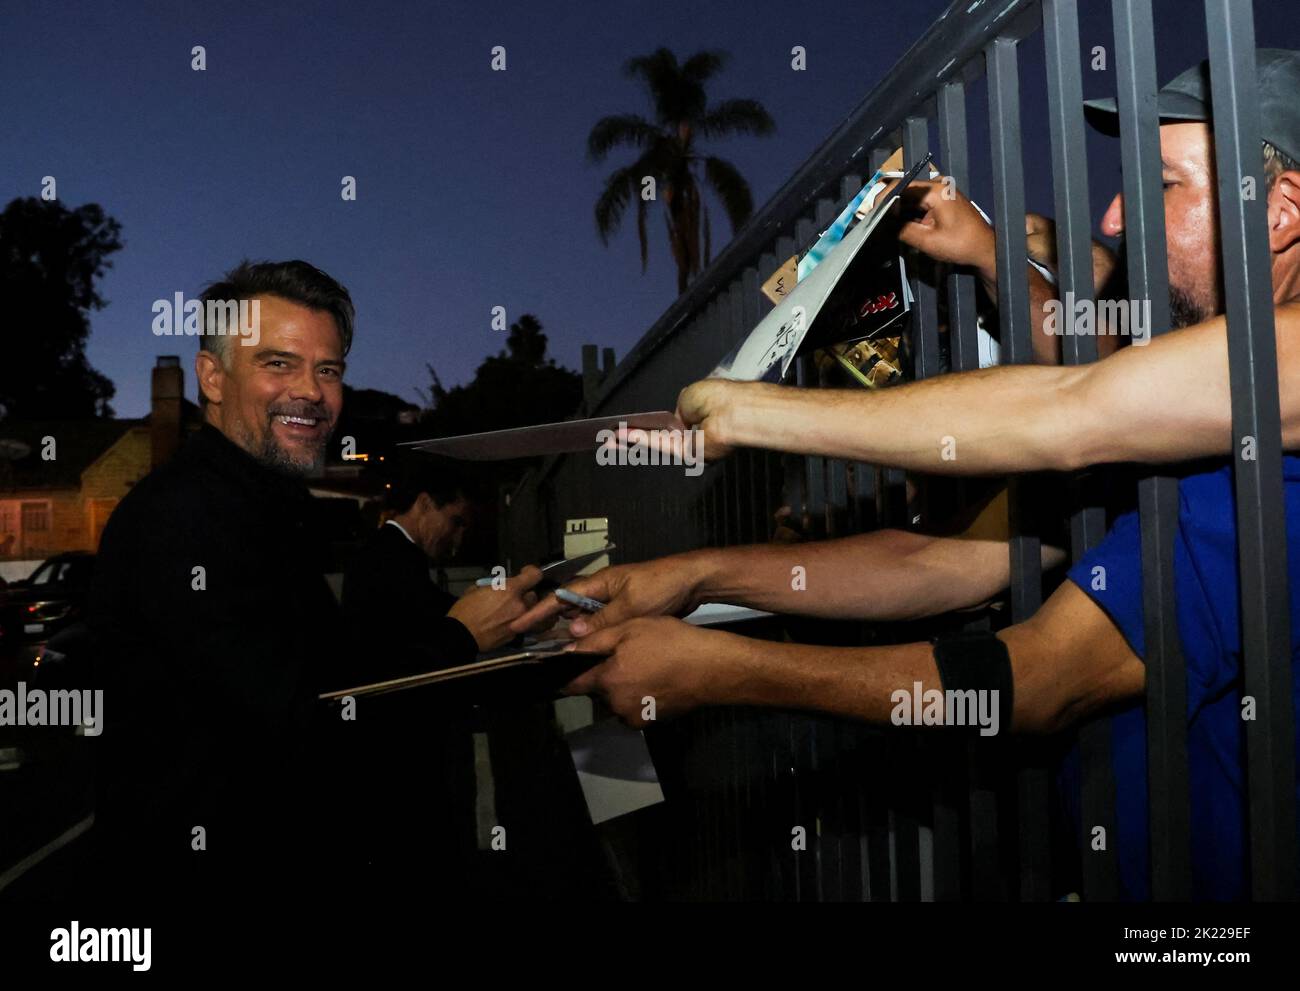 Cast member Josh Duhamel signs autographs as he attends a premiere for the film 'Bandit' in Los Angeles, California, U.S. September 21, 2022.  REUTERS/Mario Anzuoni Stock Photo